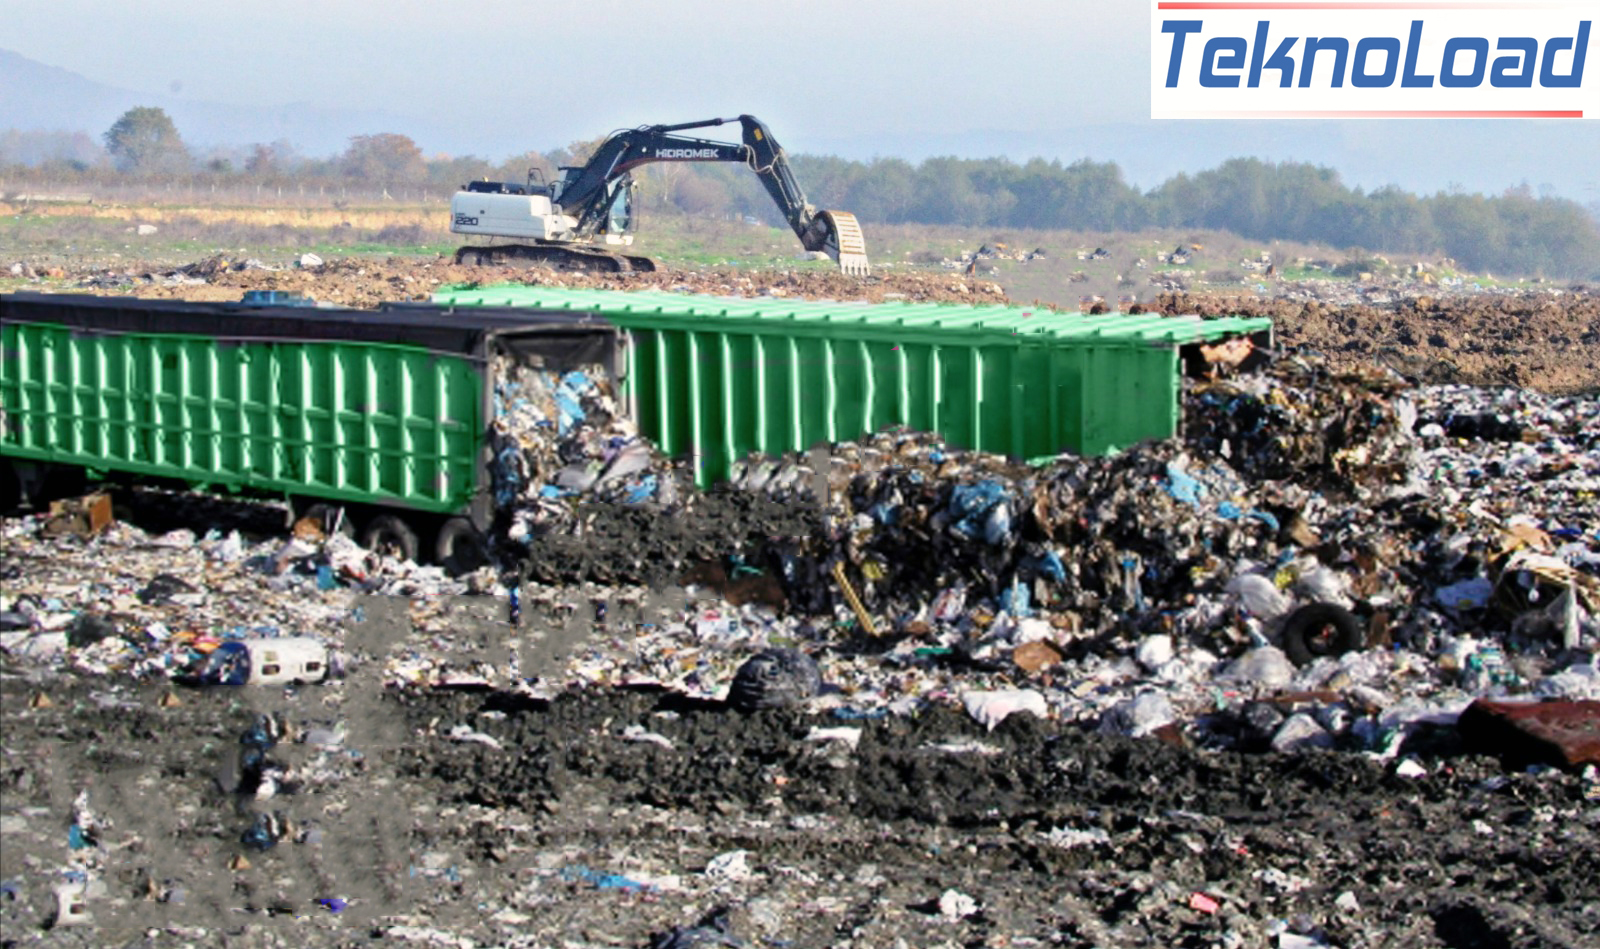 Teknoload recycling